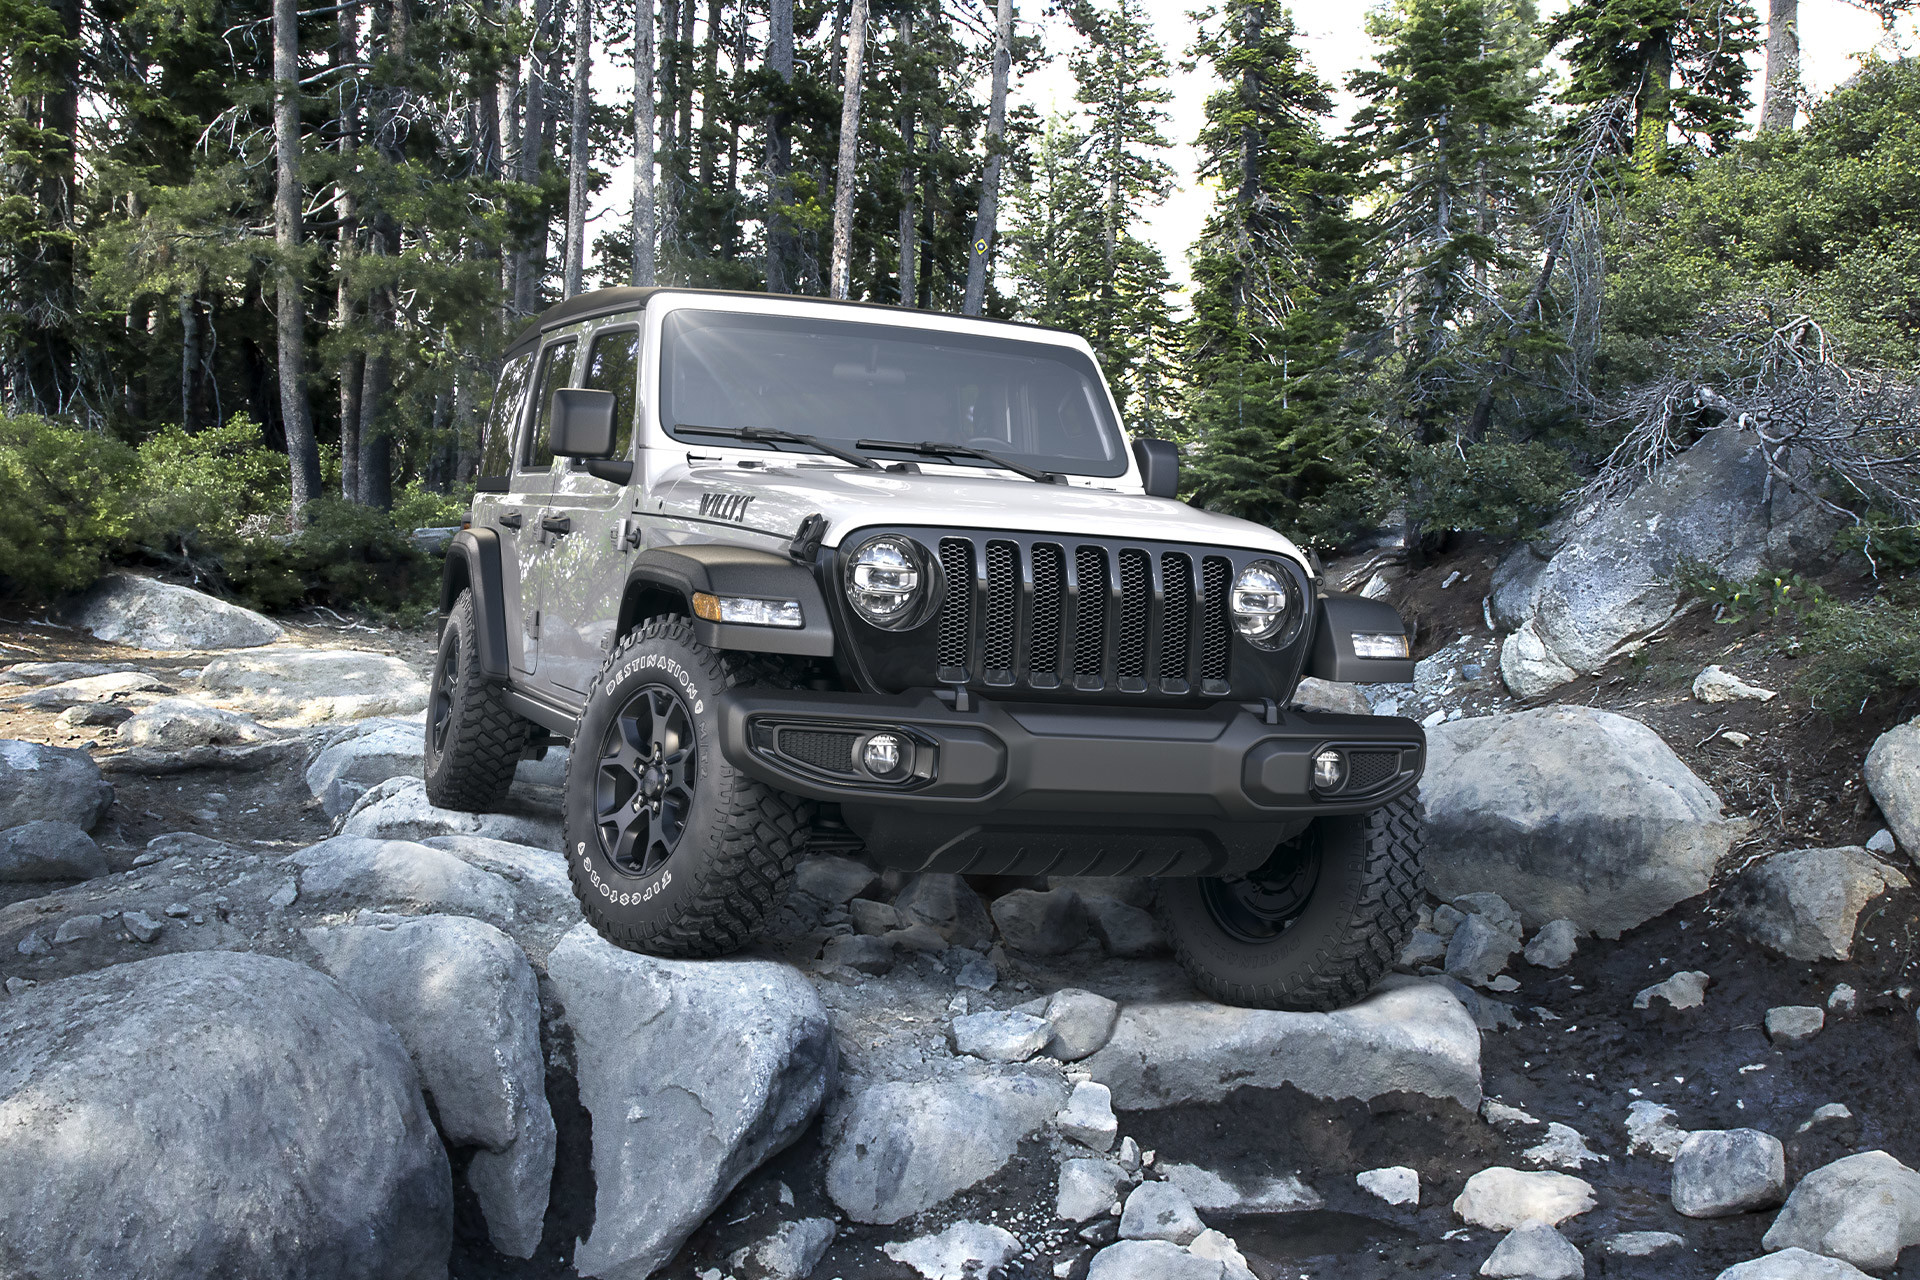 White 2022 Jeep Wrangler parked on rocky terrain in a forest area